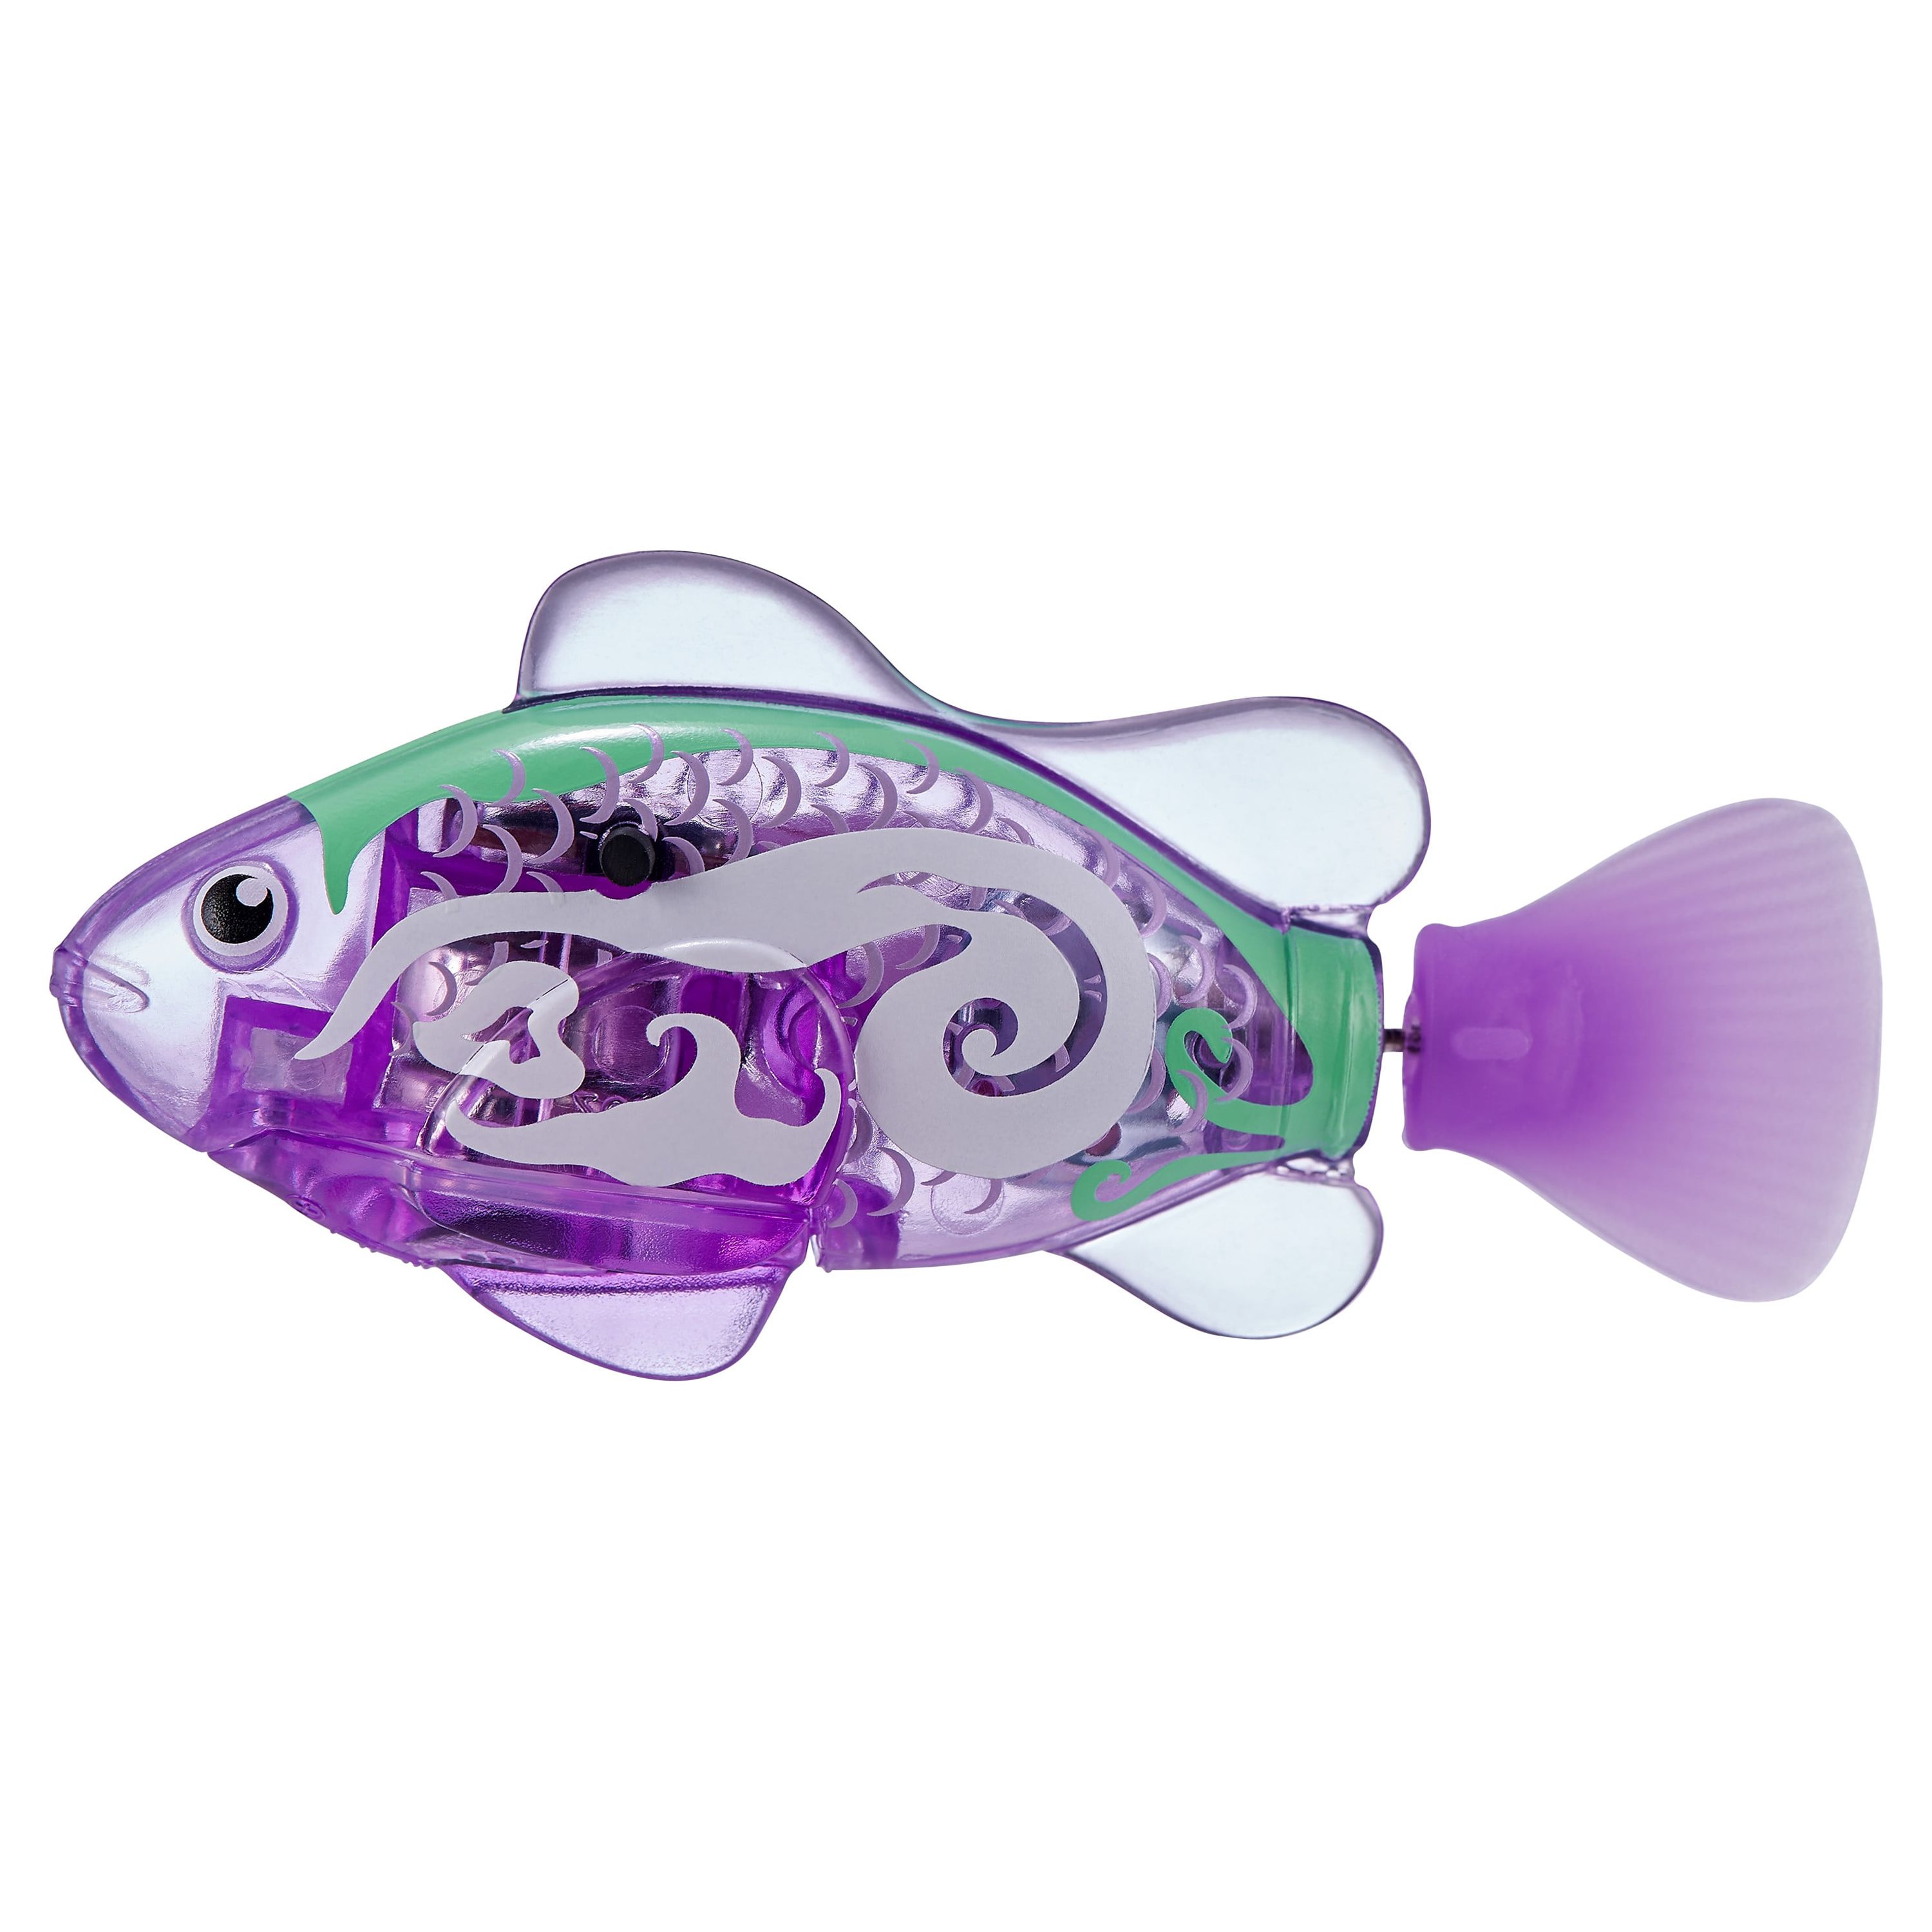 Robo Alive Electronic Interactive Fish Lilac - image 3 of 8